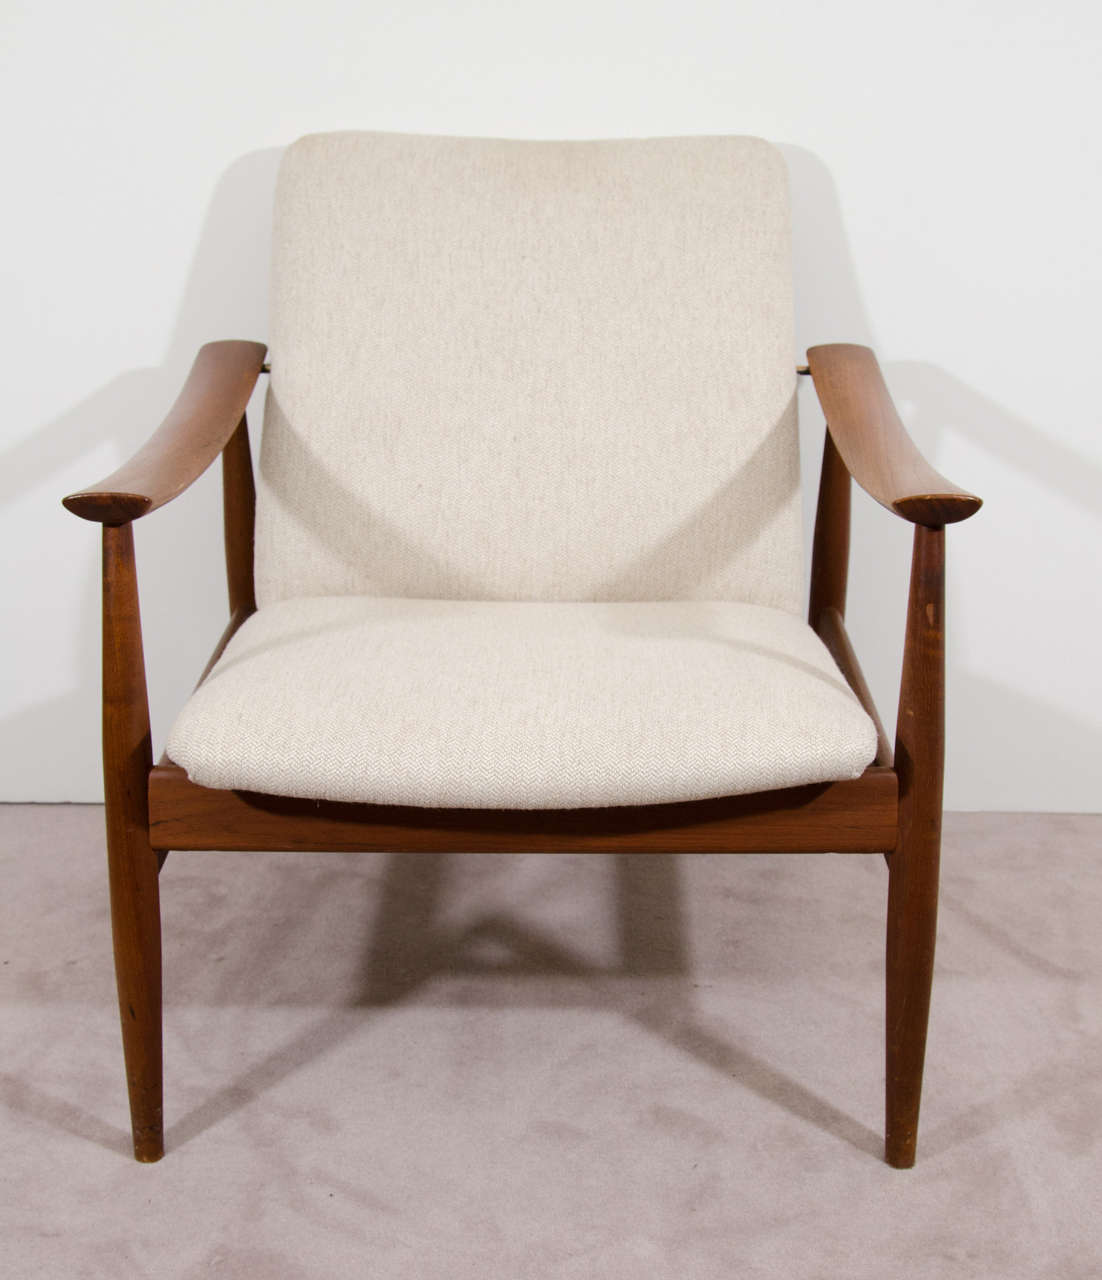 A vintage teak lounge chair by Finn Juhl for France and Sons. Retains its original France and Sons label and John Stuart label. Good vintage condition with age appropriate wear. Some scuff marks to the wood.